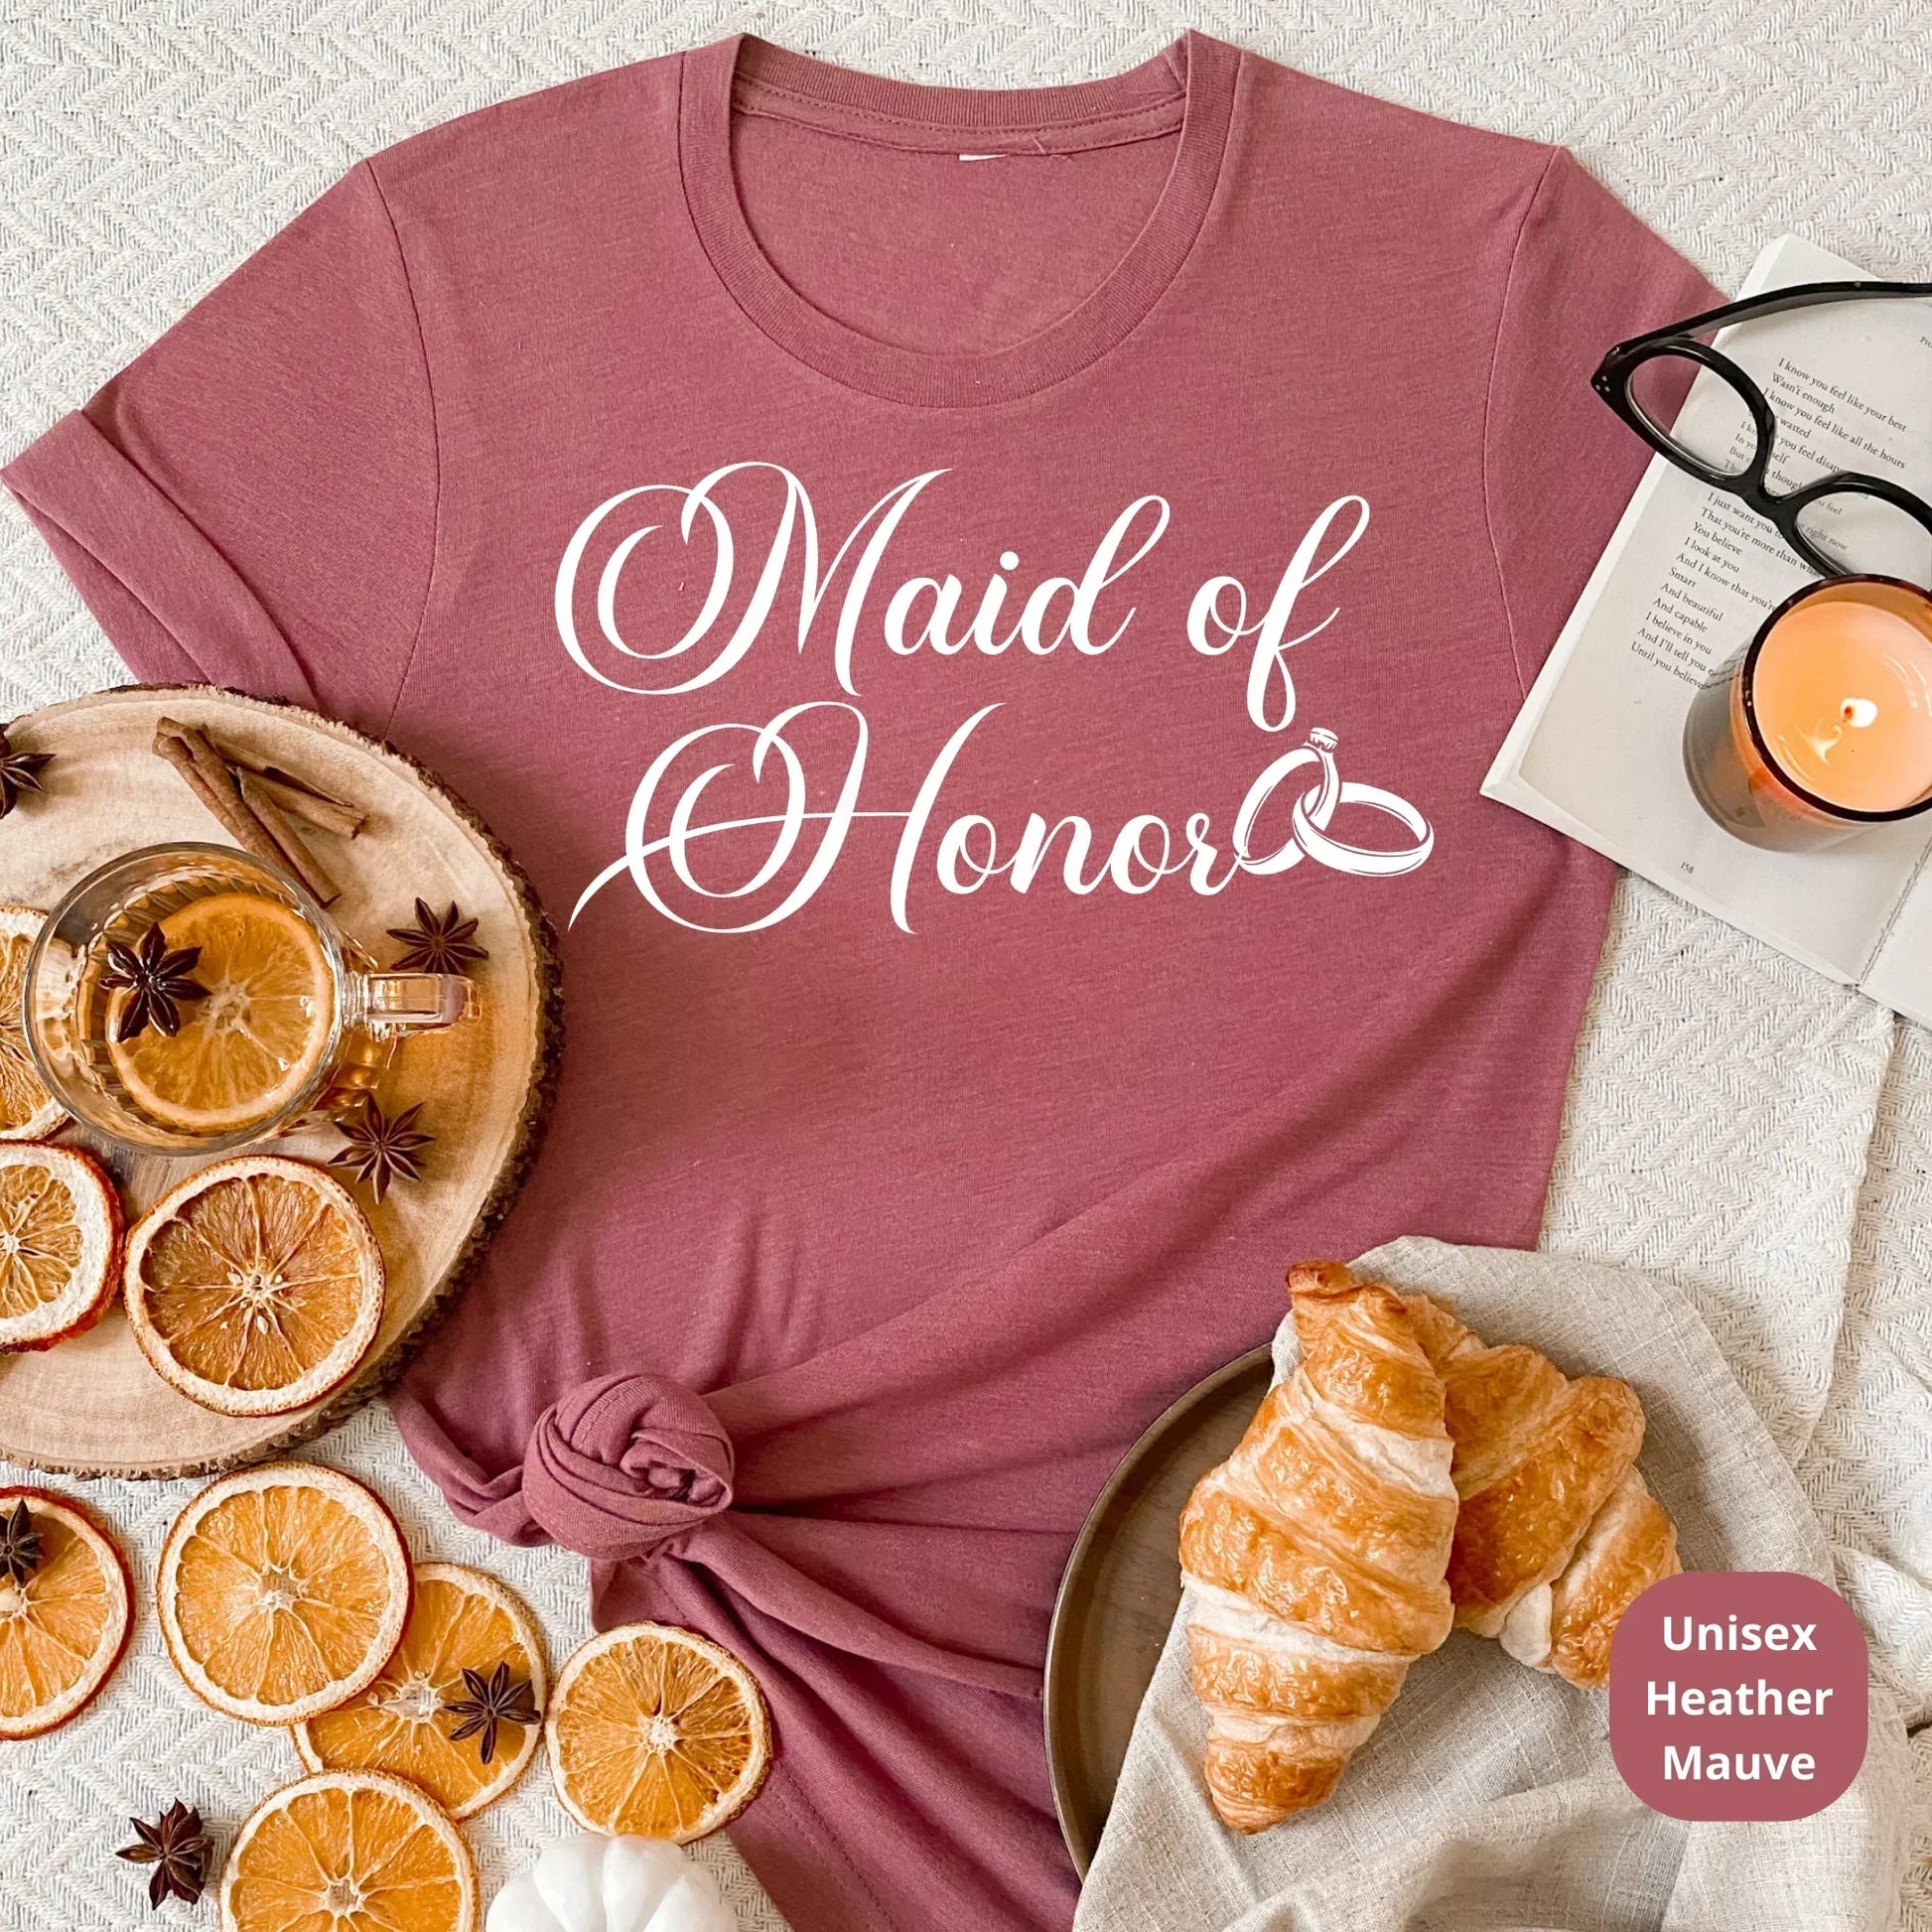 Bridal Party Shirts for Wedding Party